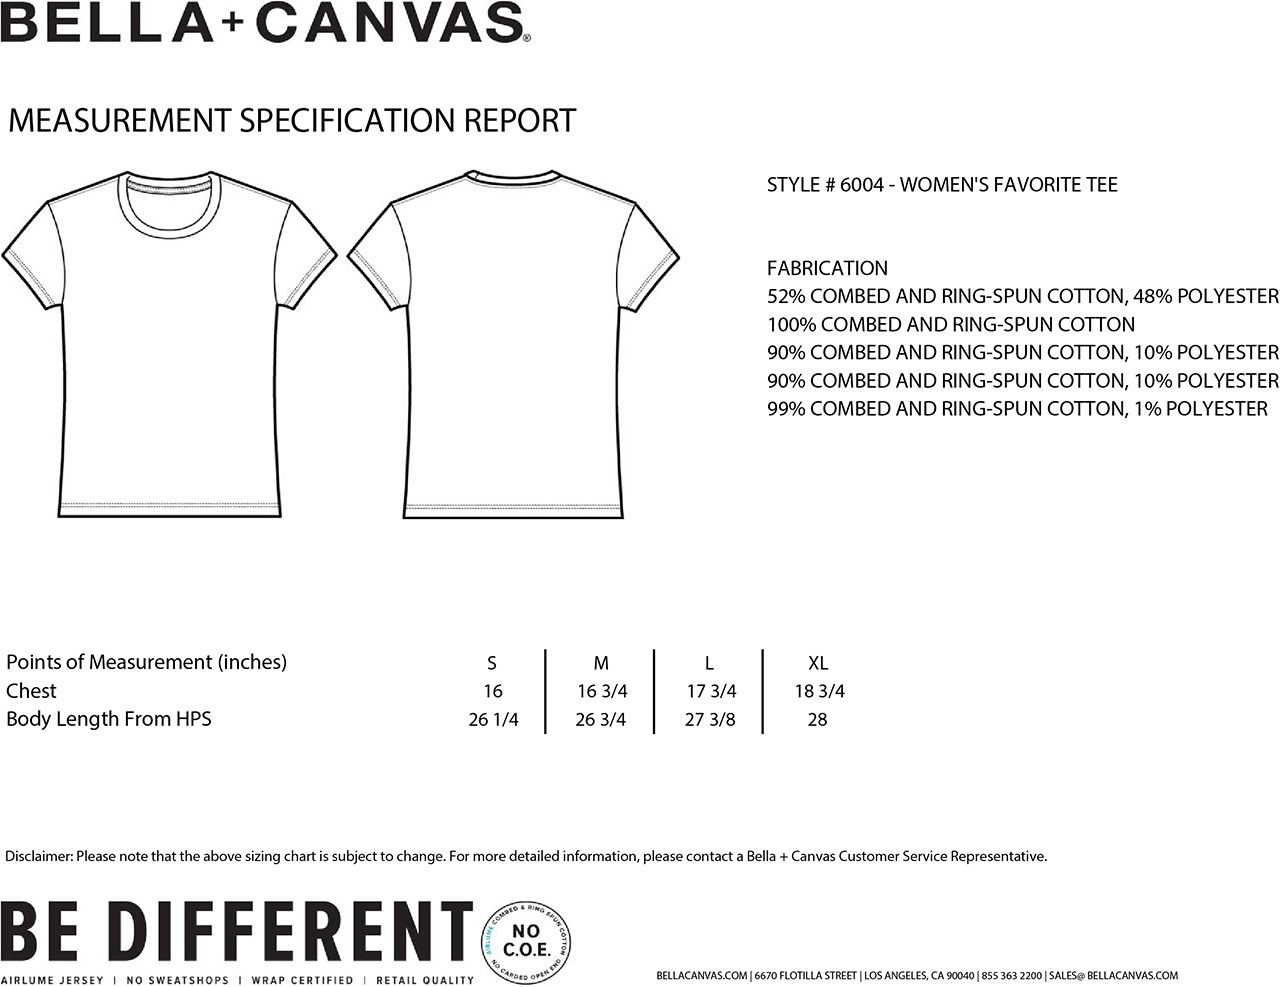 Bella Canvas t-shirt sizing guide